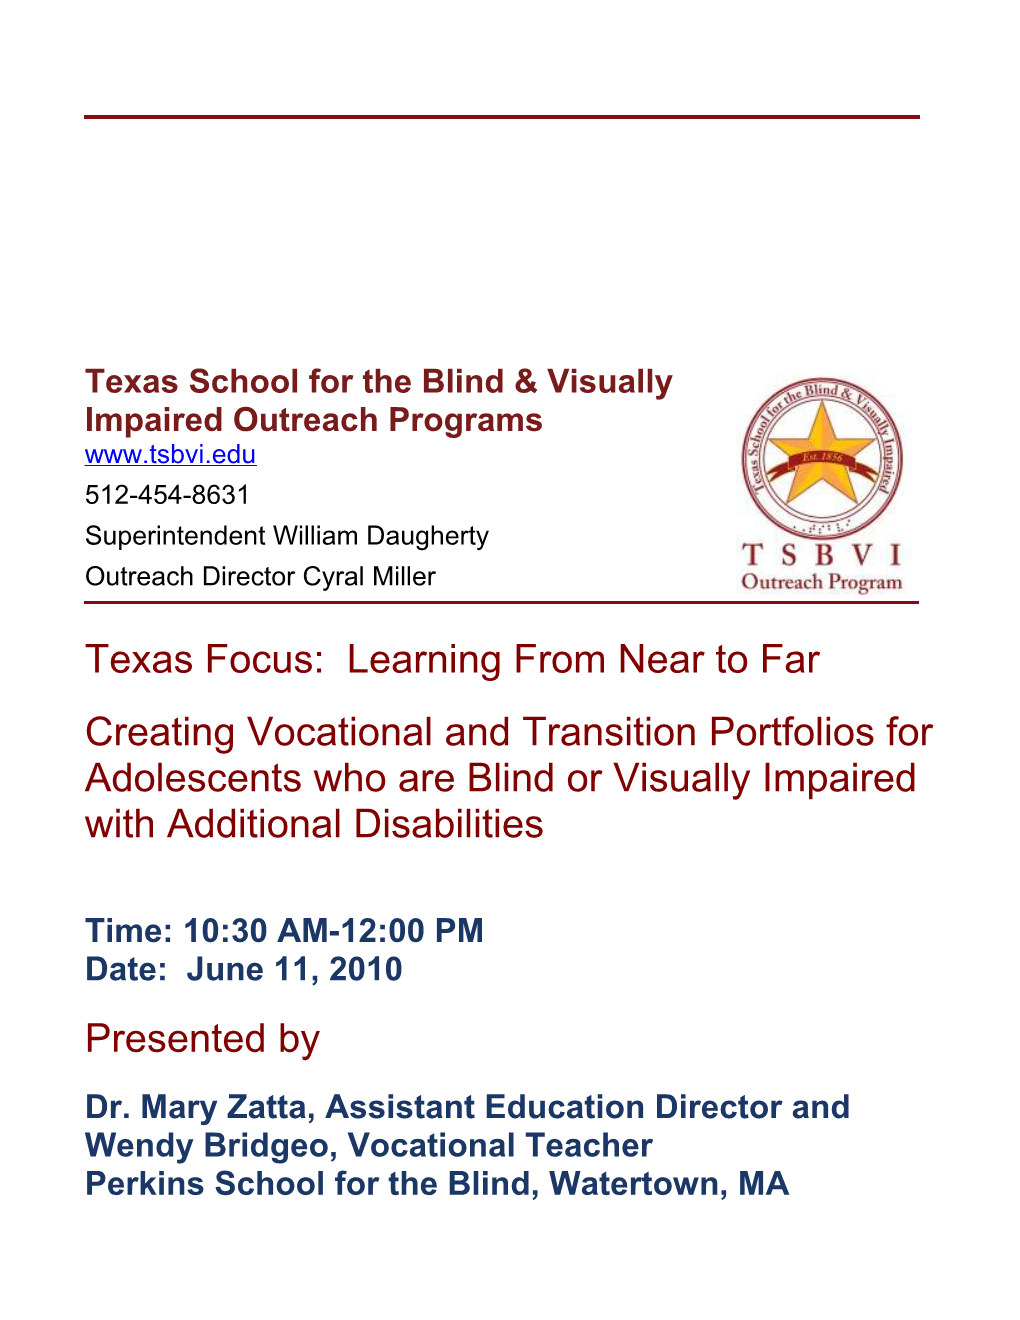 Creating Vocational and Transition Portfolios for Adolescents Who Are Blind Or Visually